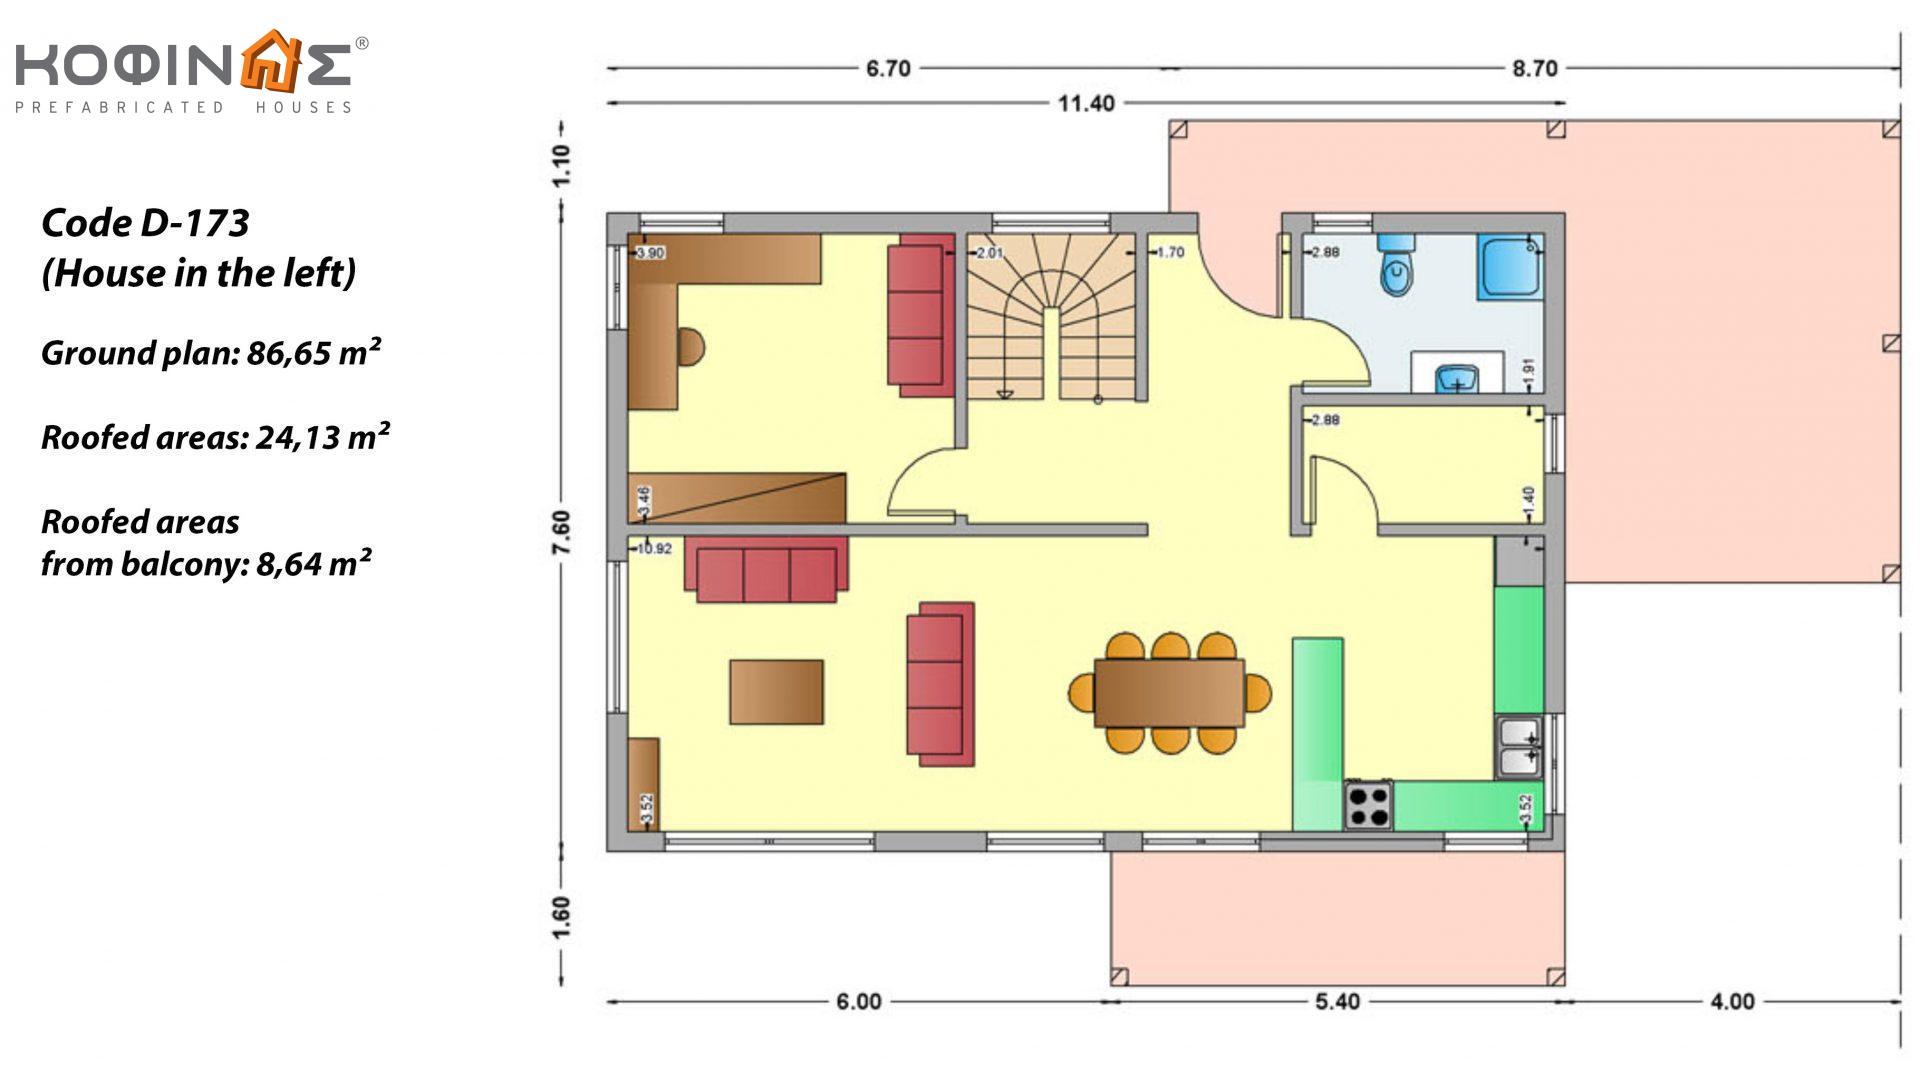 2-story house D-173, total surface of 173,30 m²,covered roofed areas 32.77 m²,balconies 8.64 m²